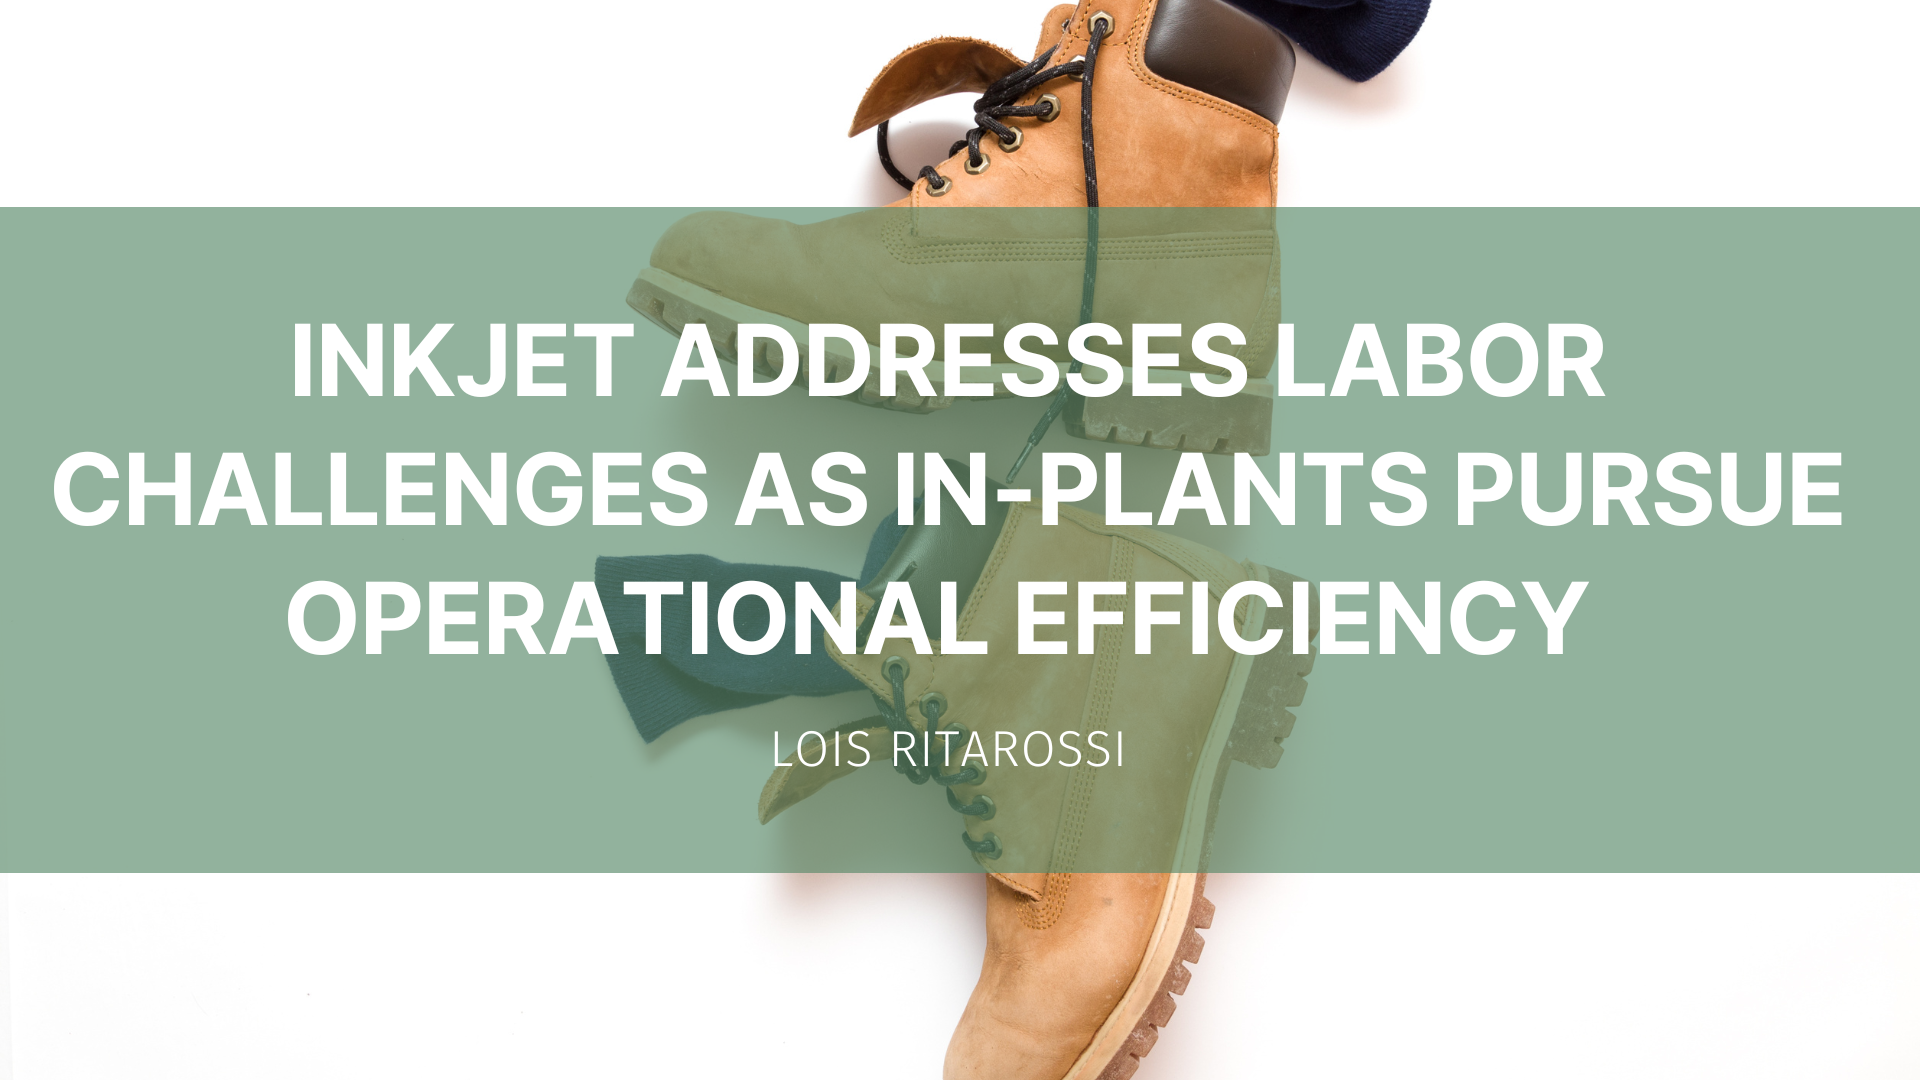 Featured image for “Inkjet addresses labor challenges as in-plants pursue operational efficiency”